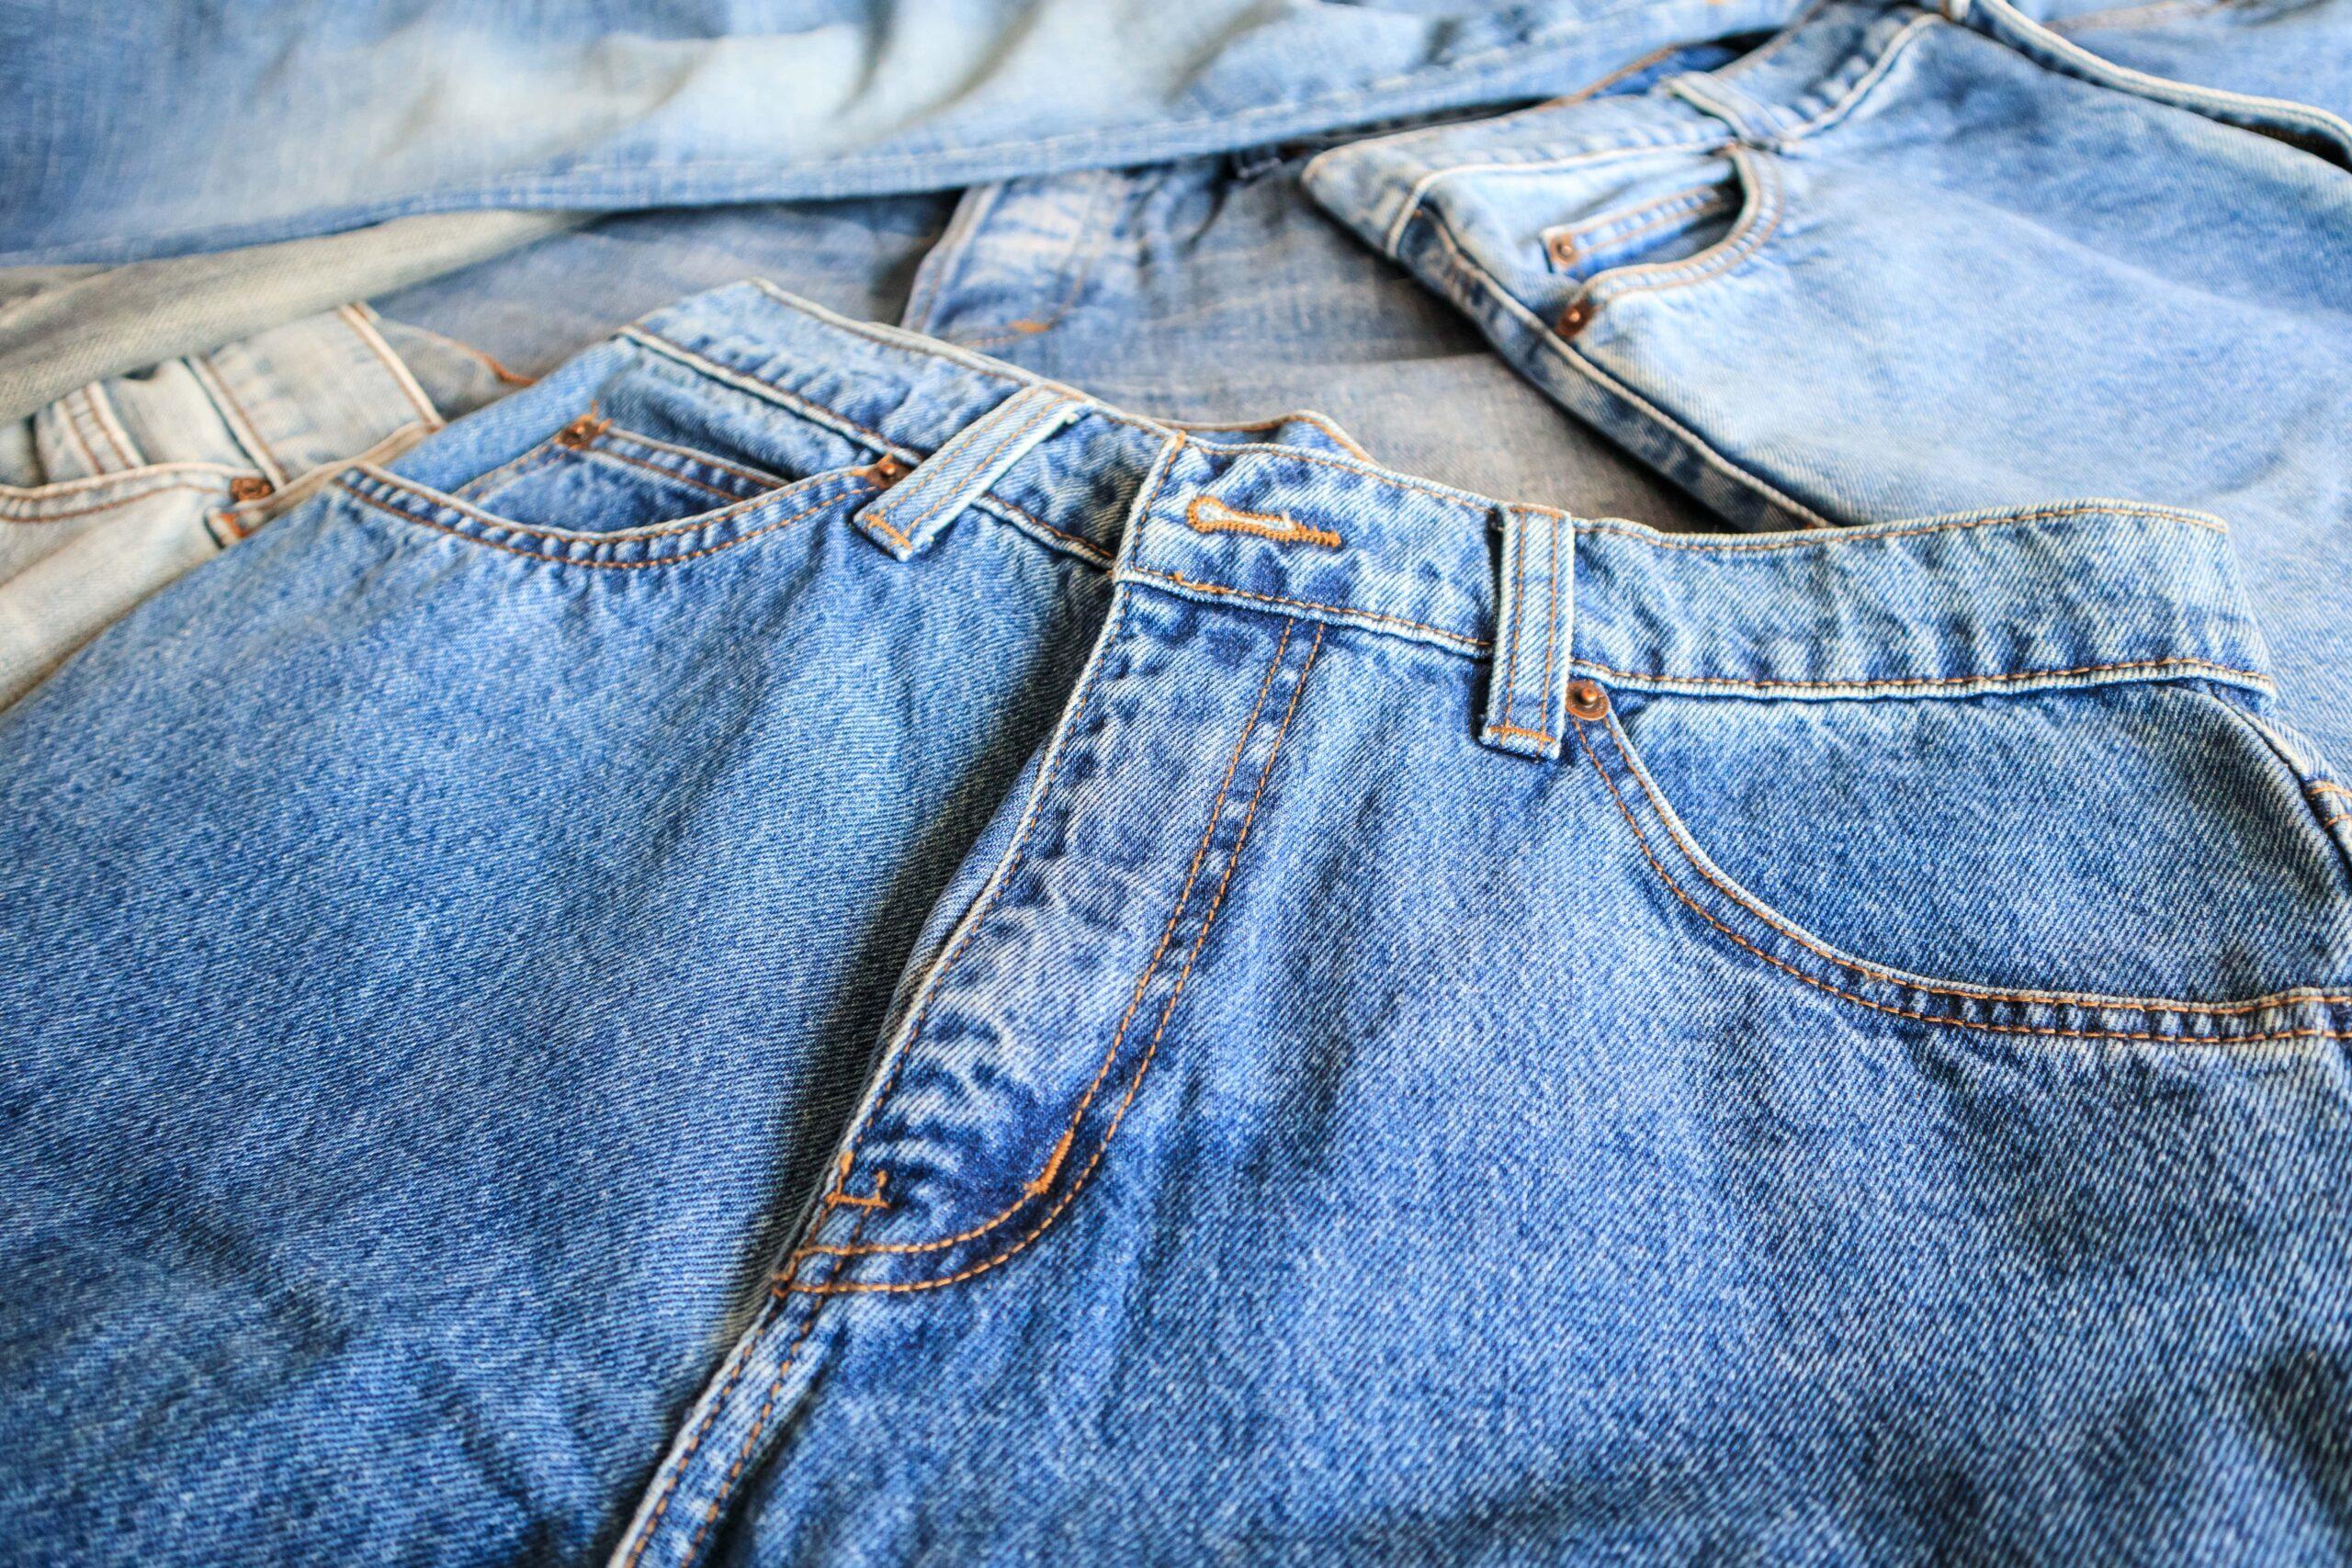 What Size Women’s Jeans is a 30? Amazing Ideas For The Perfect Fit!